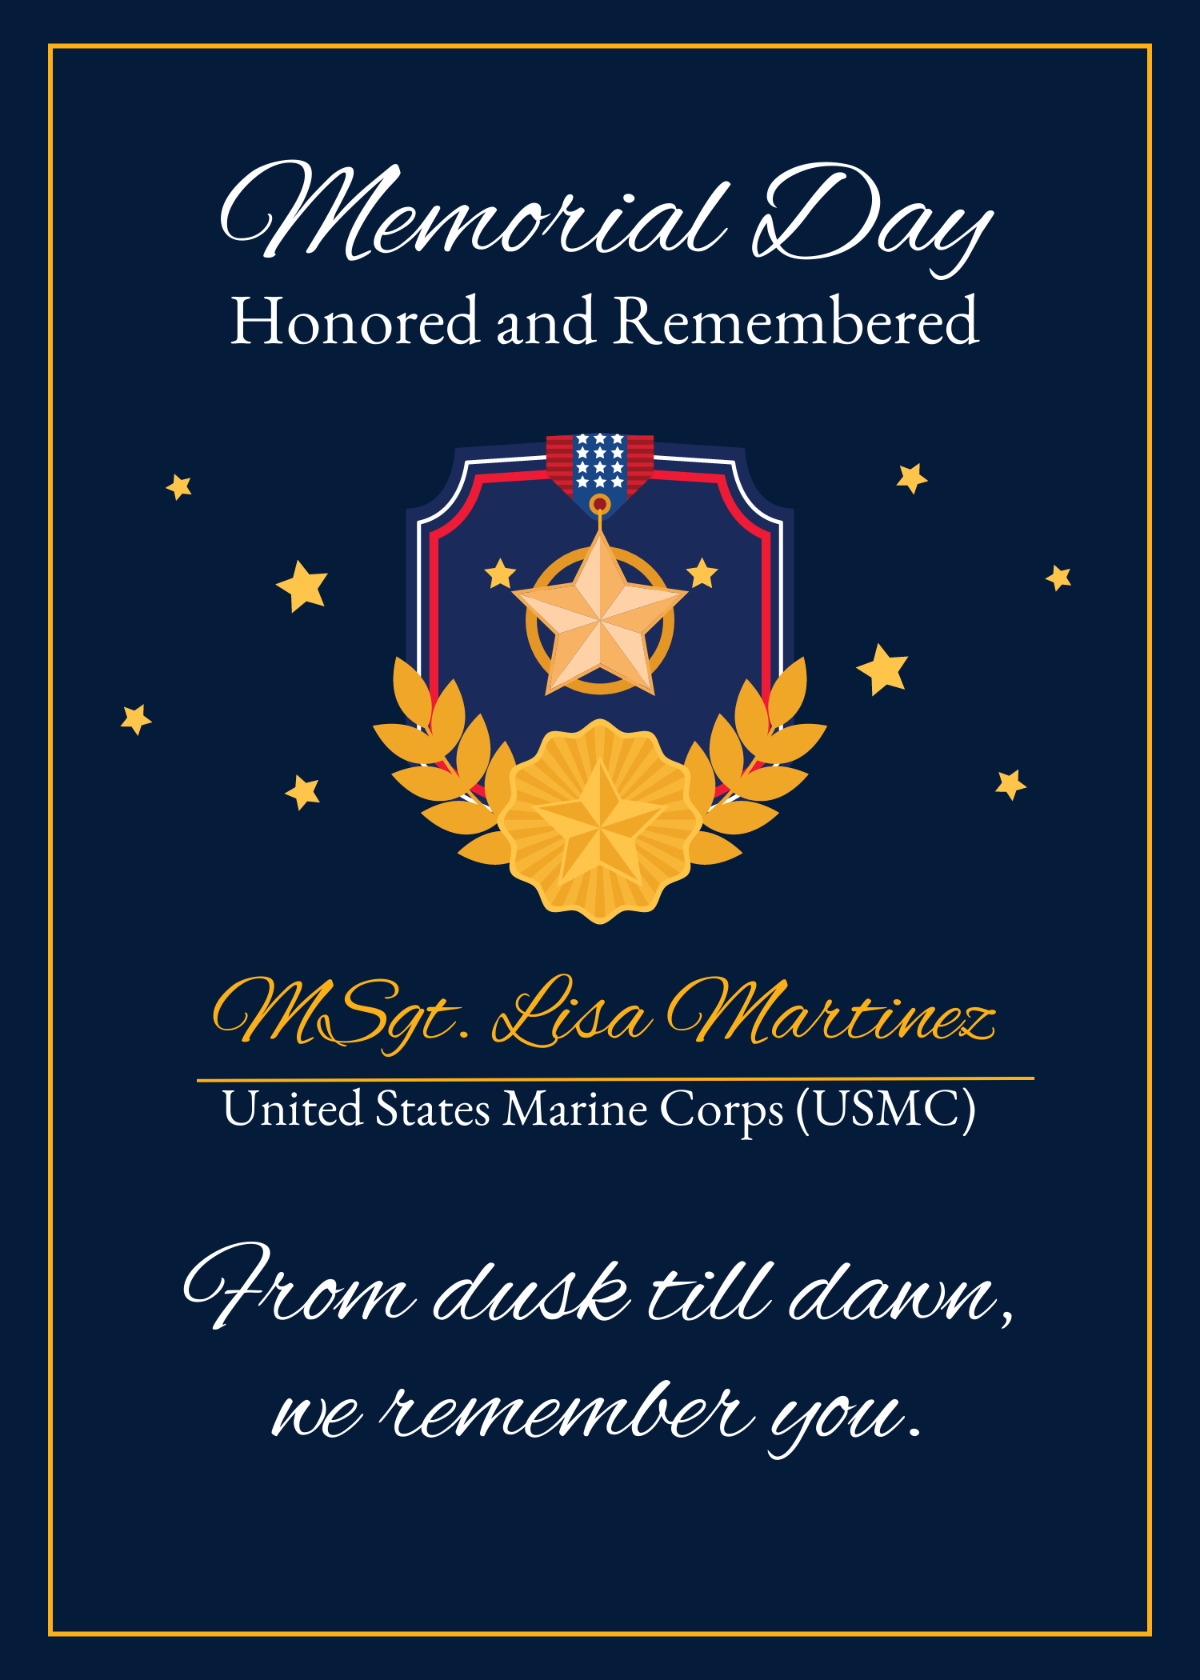 Memorial Day Remembrance Card